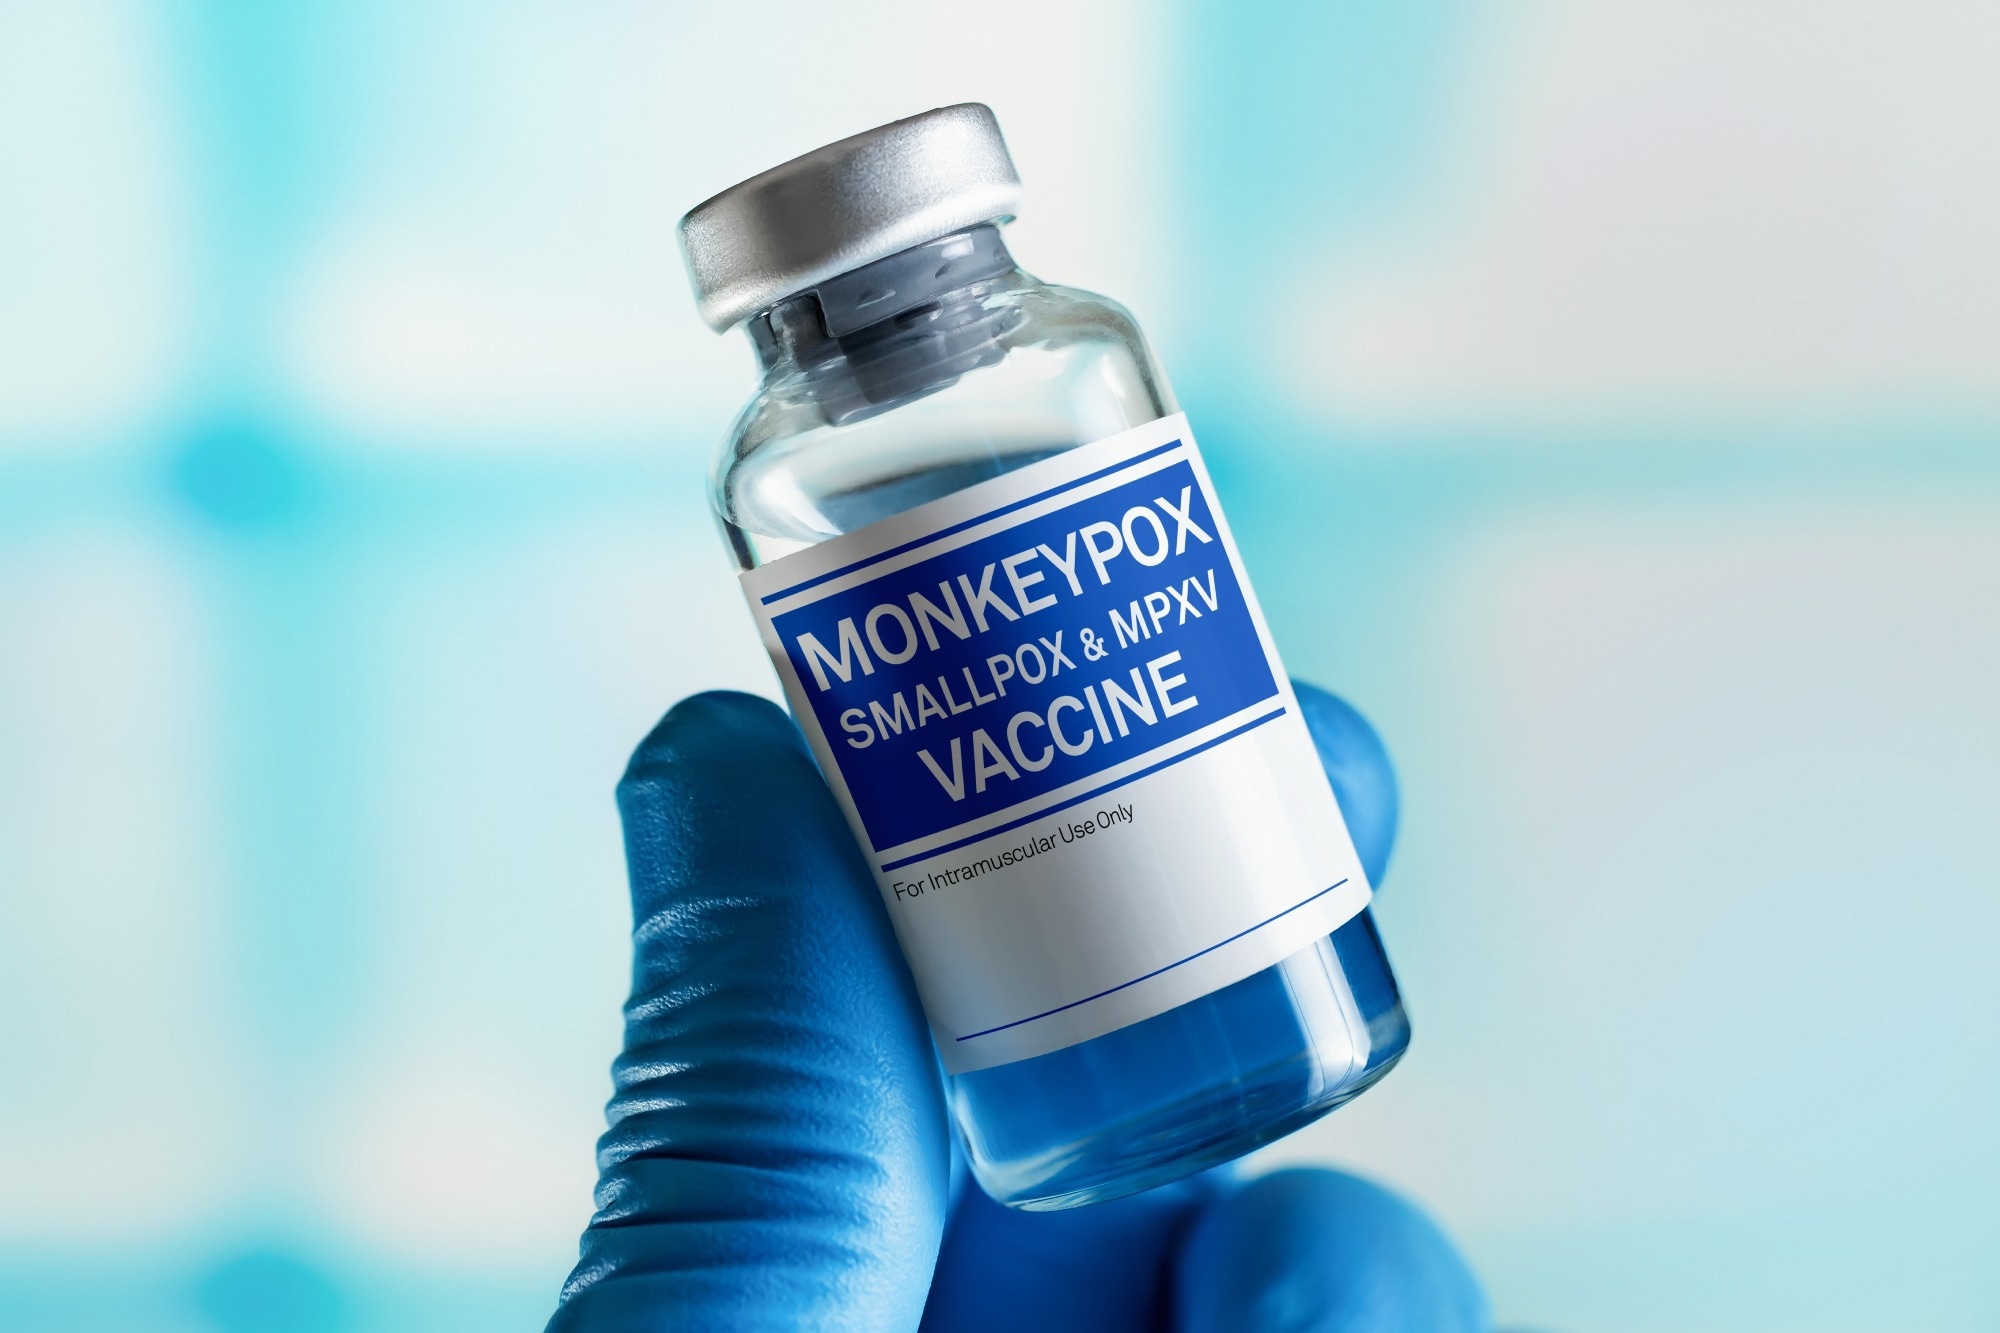 Study: Prevalence of intentions to receive monkeypox vaccine. A systematic review and meta-analysis. Image Credit: angellodeco/Shutterstock.com